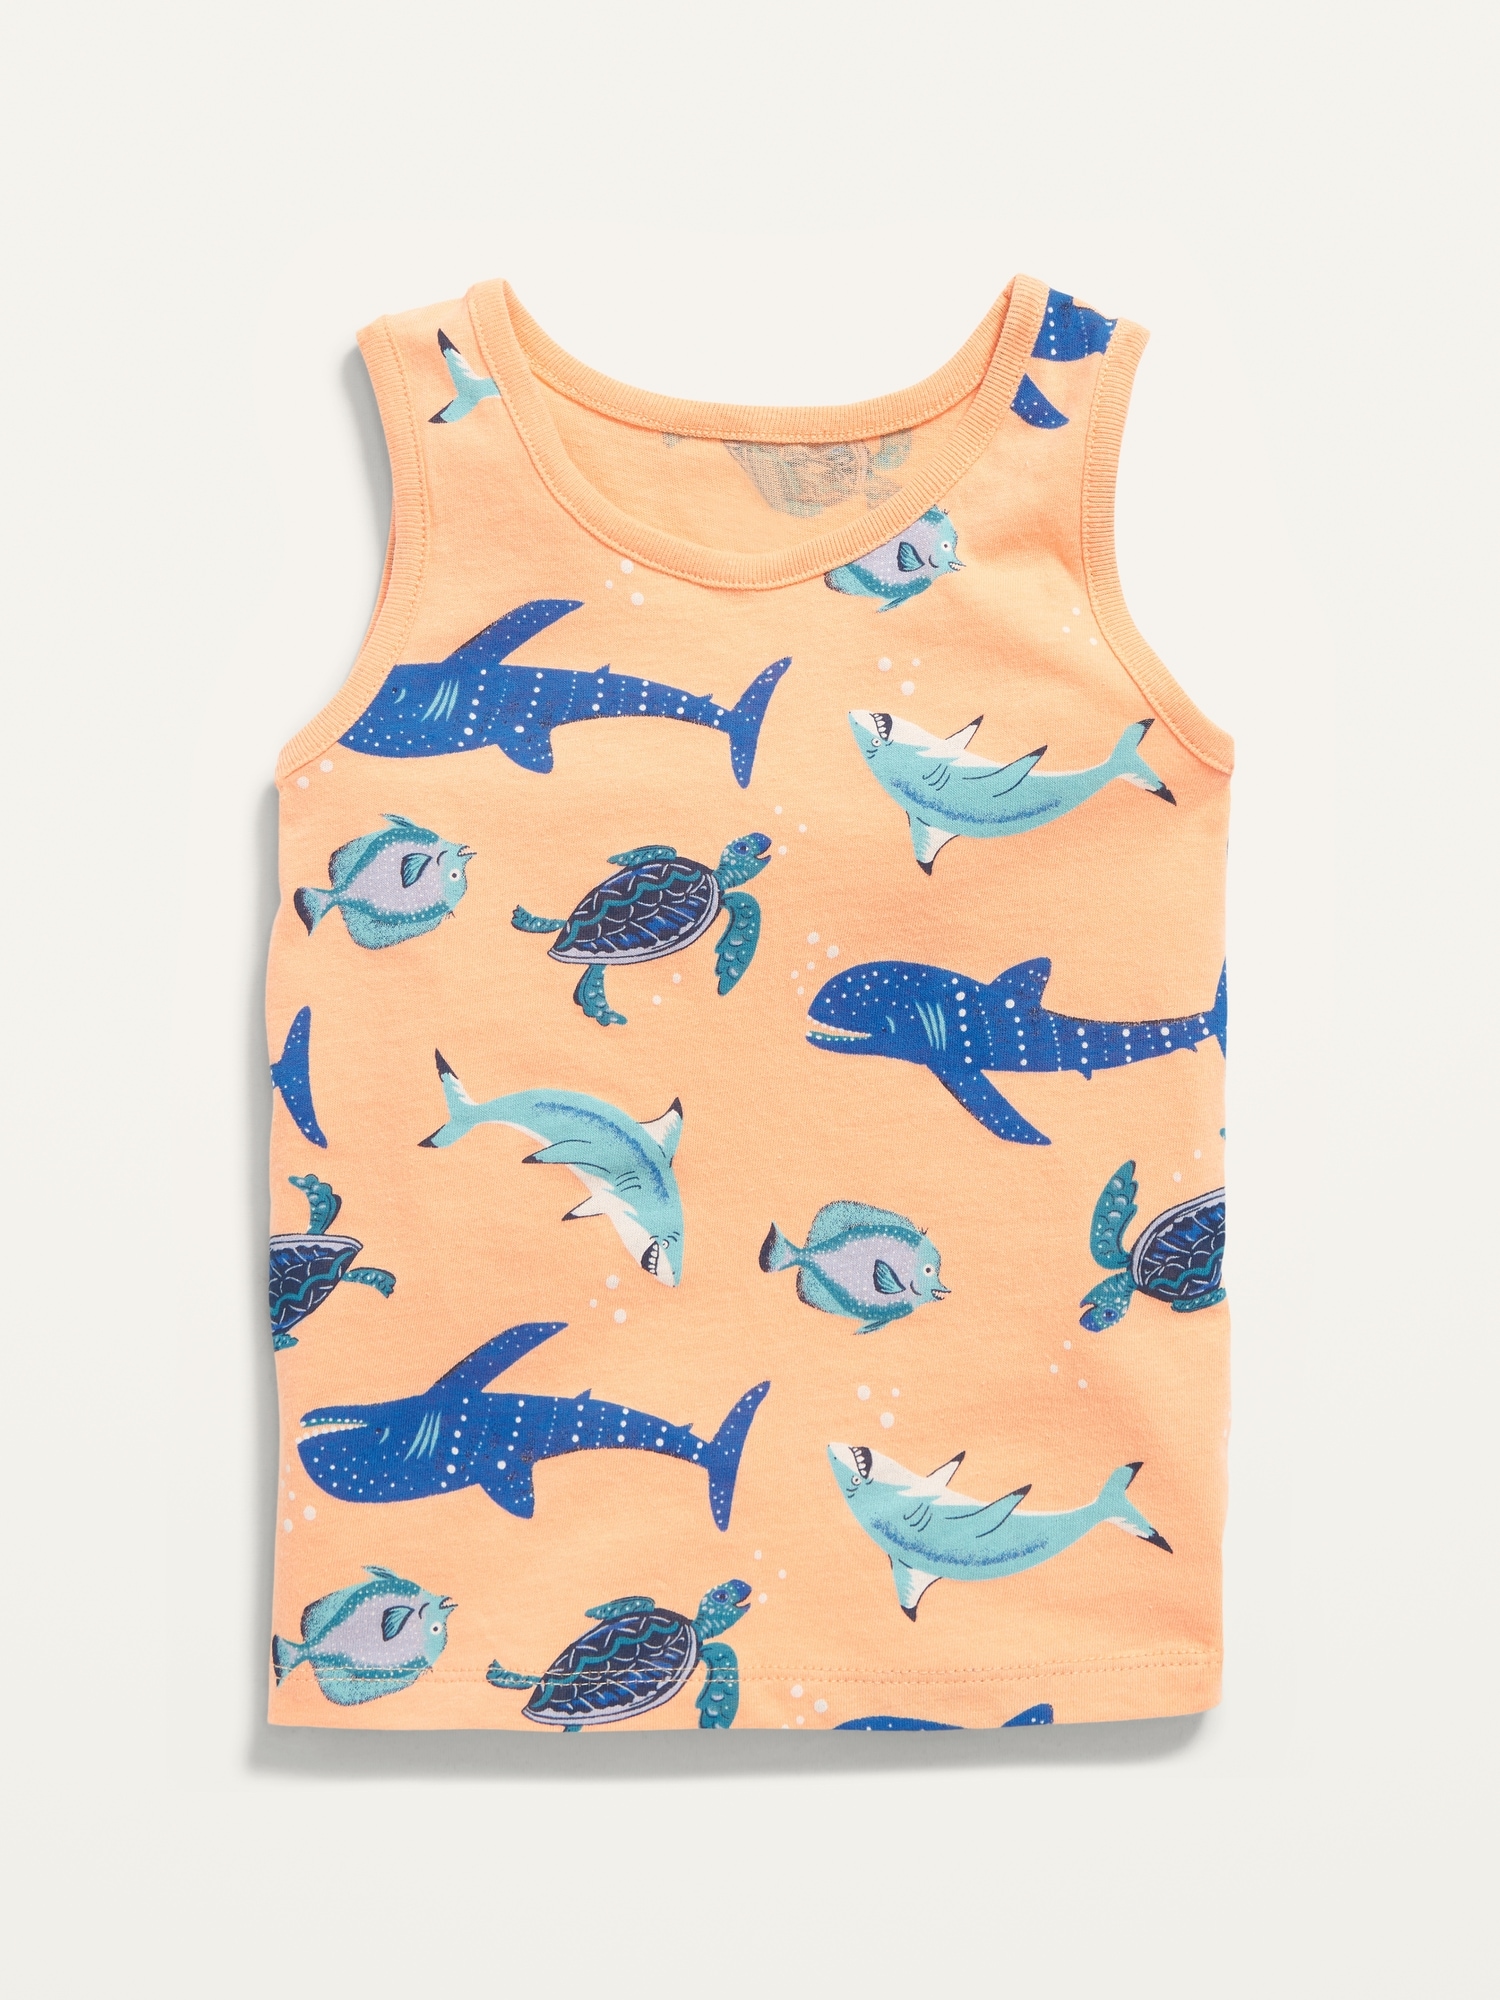 Unisex Printed Tank Top for Toddler